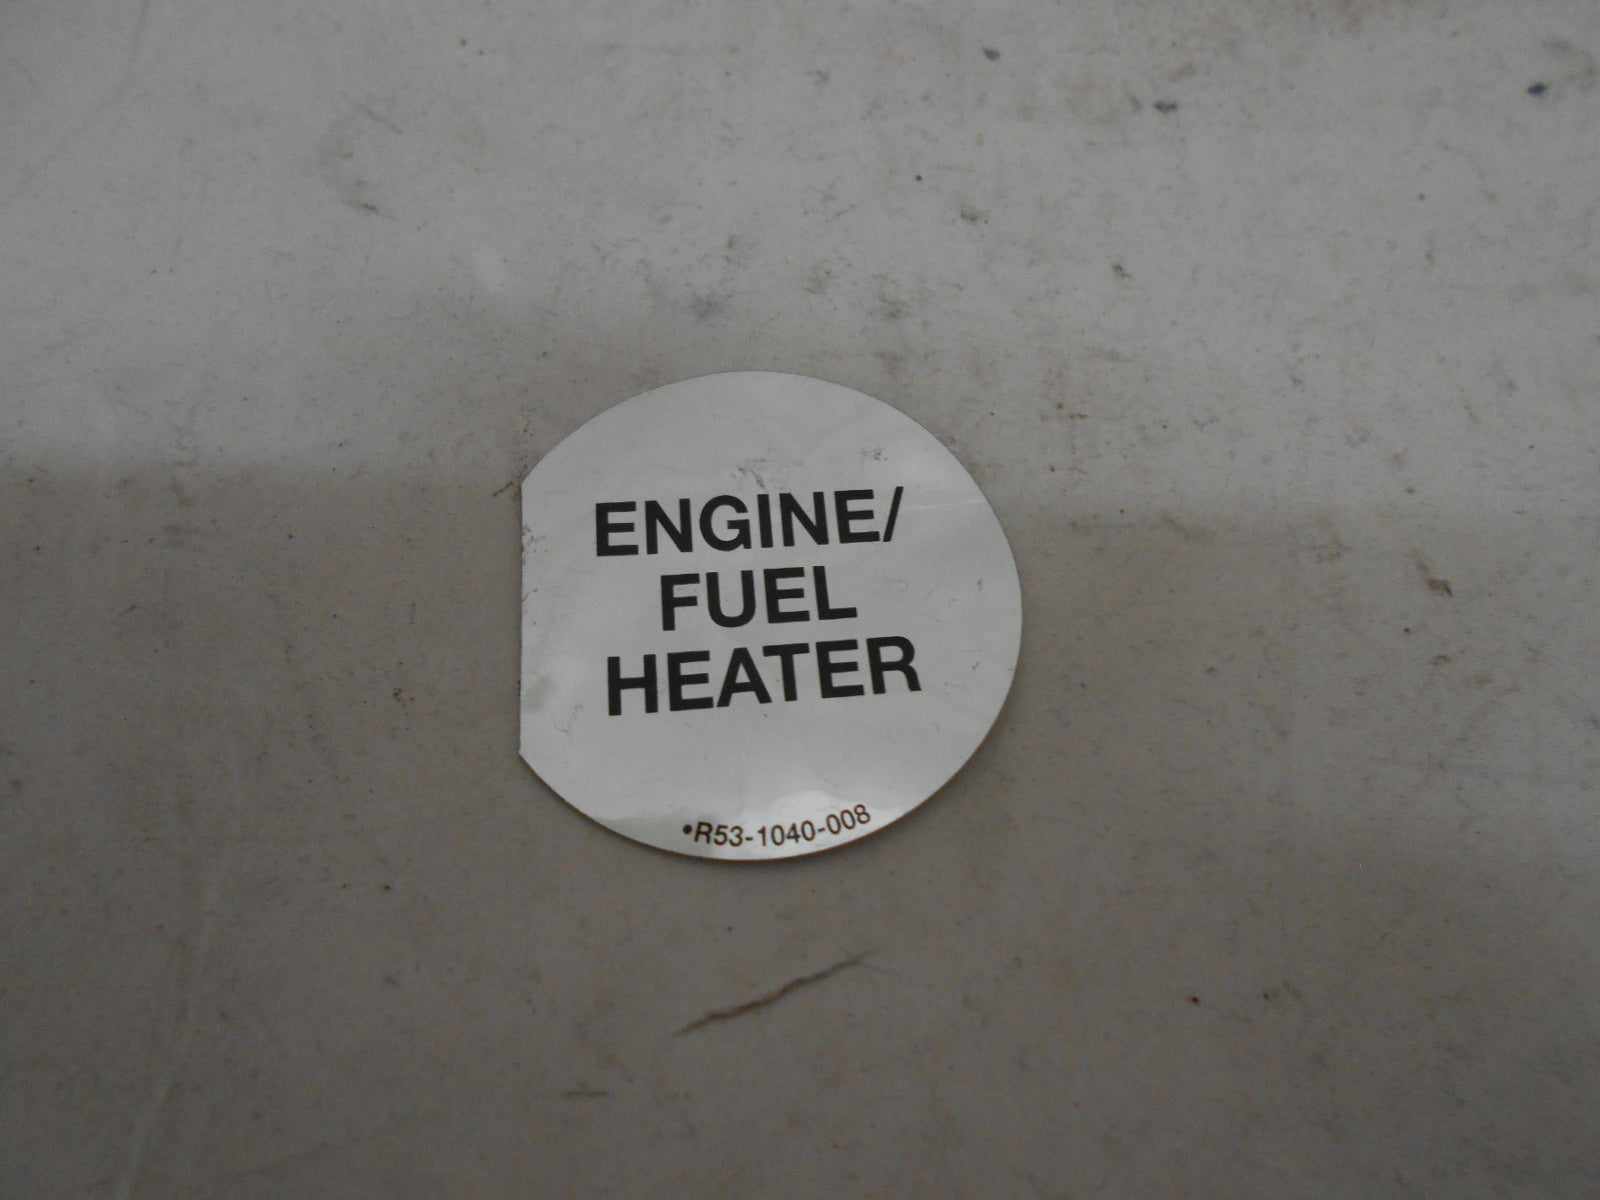 ENGINE FUEL HEATER DECAL